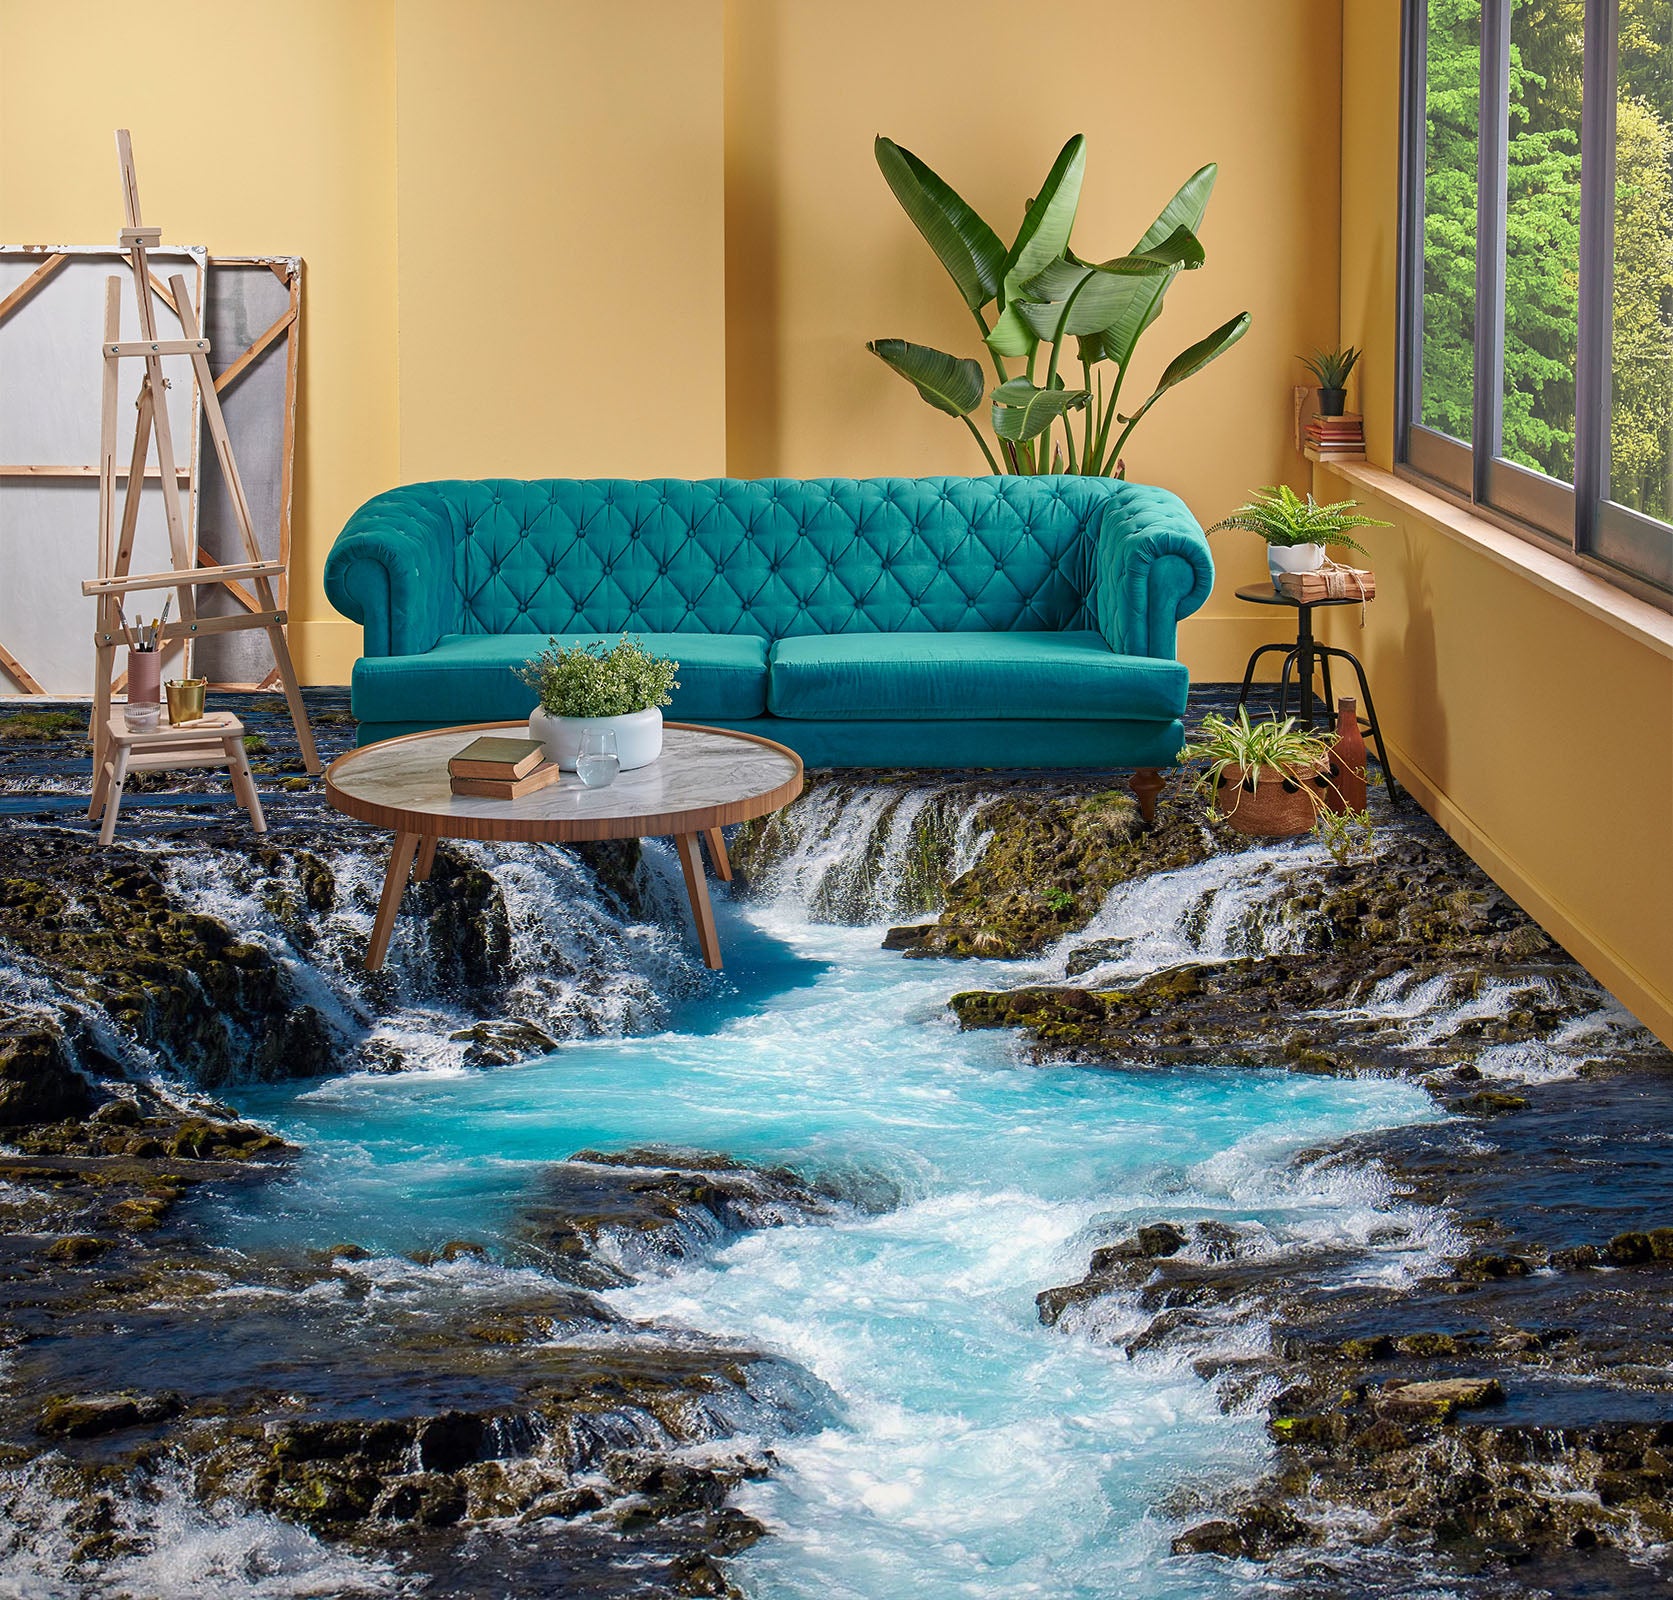 3D Convergence Of Water 1466 Floor Mural  Wallpaper Murals Self-Adhesive Removable Print Epoxy